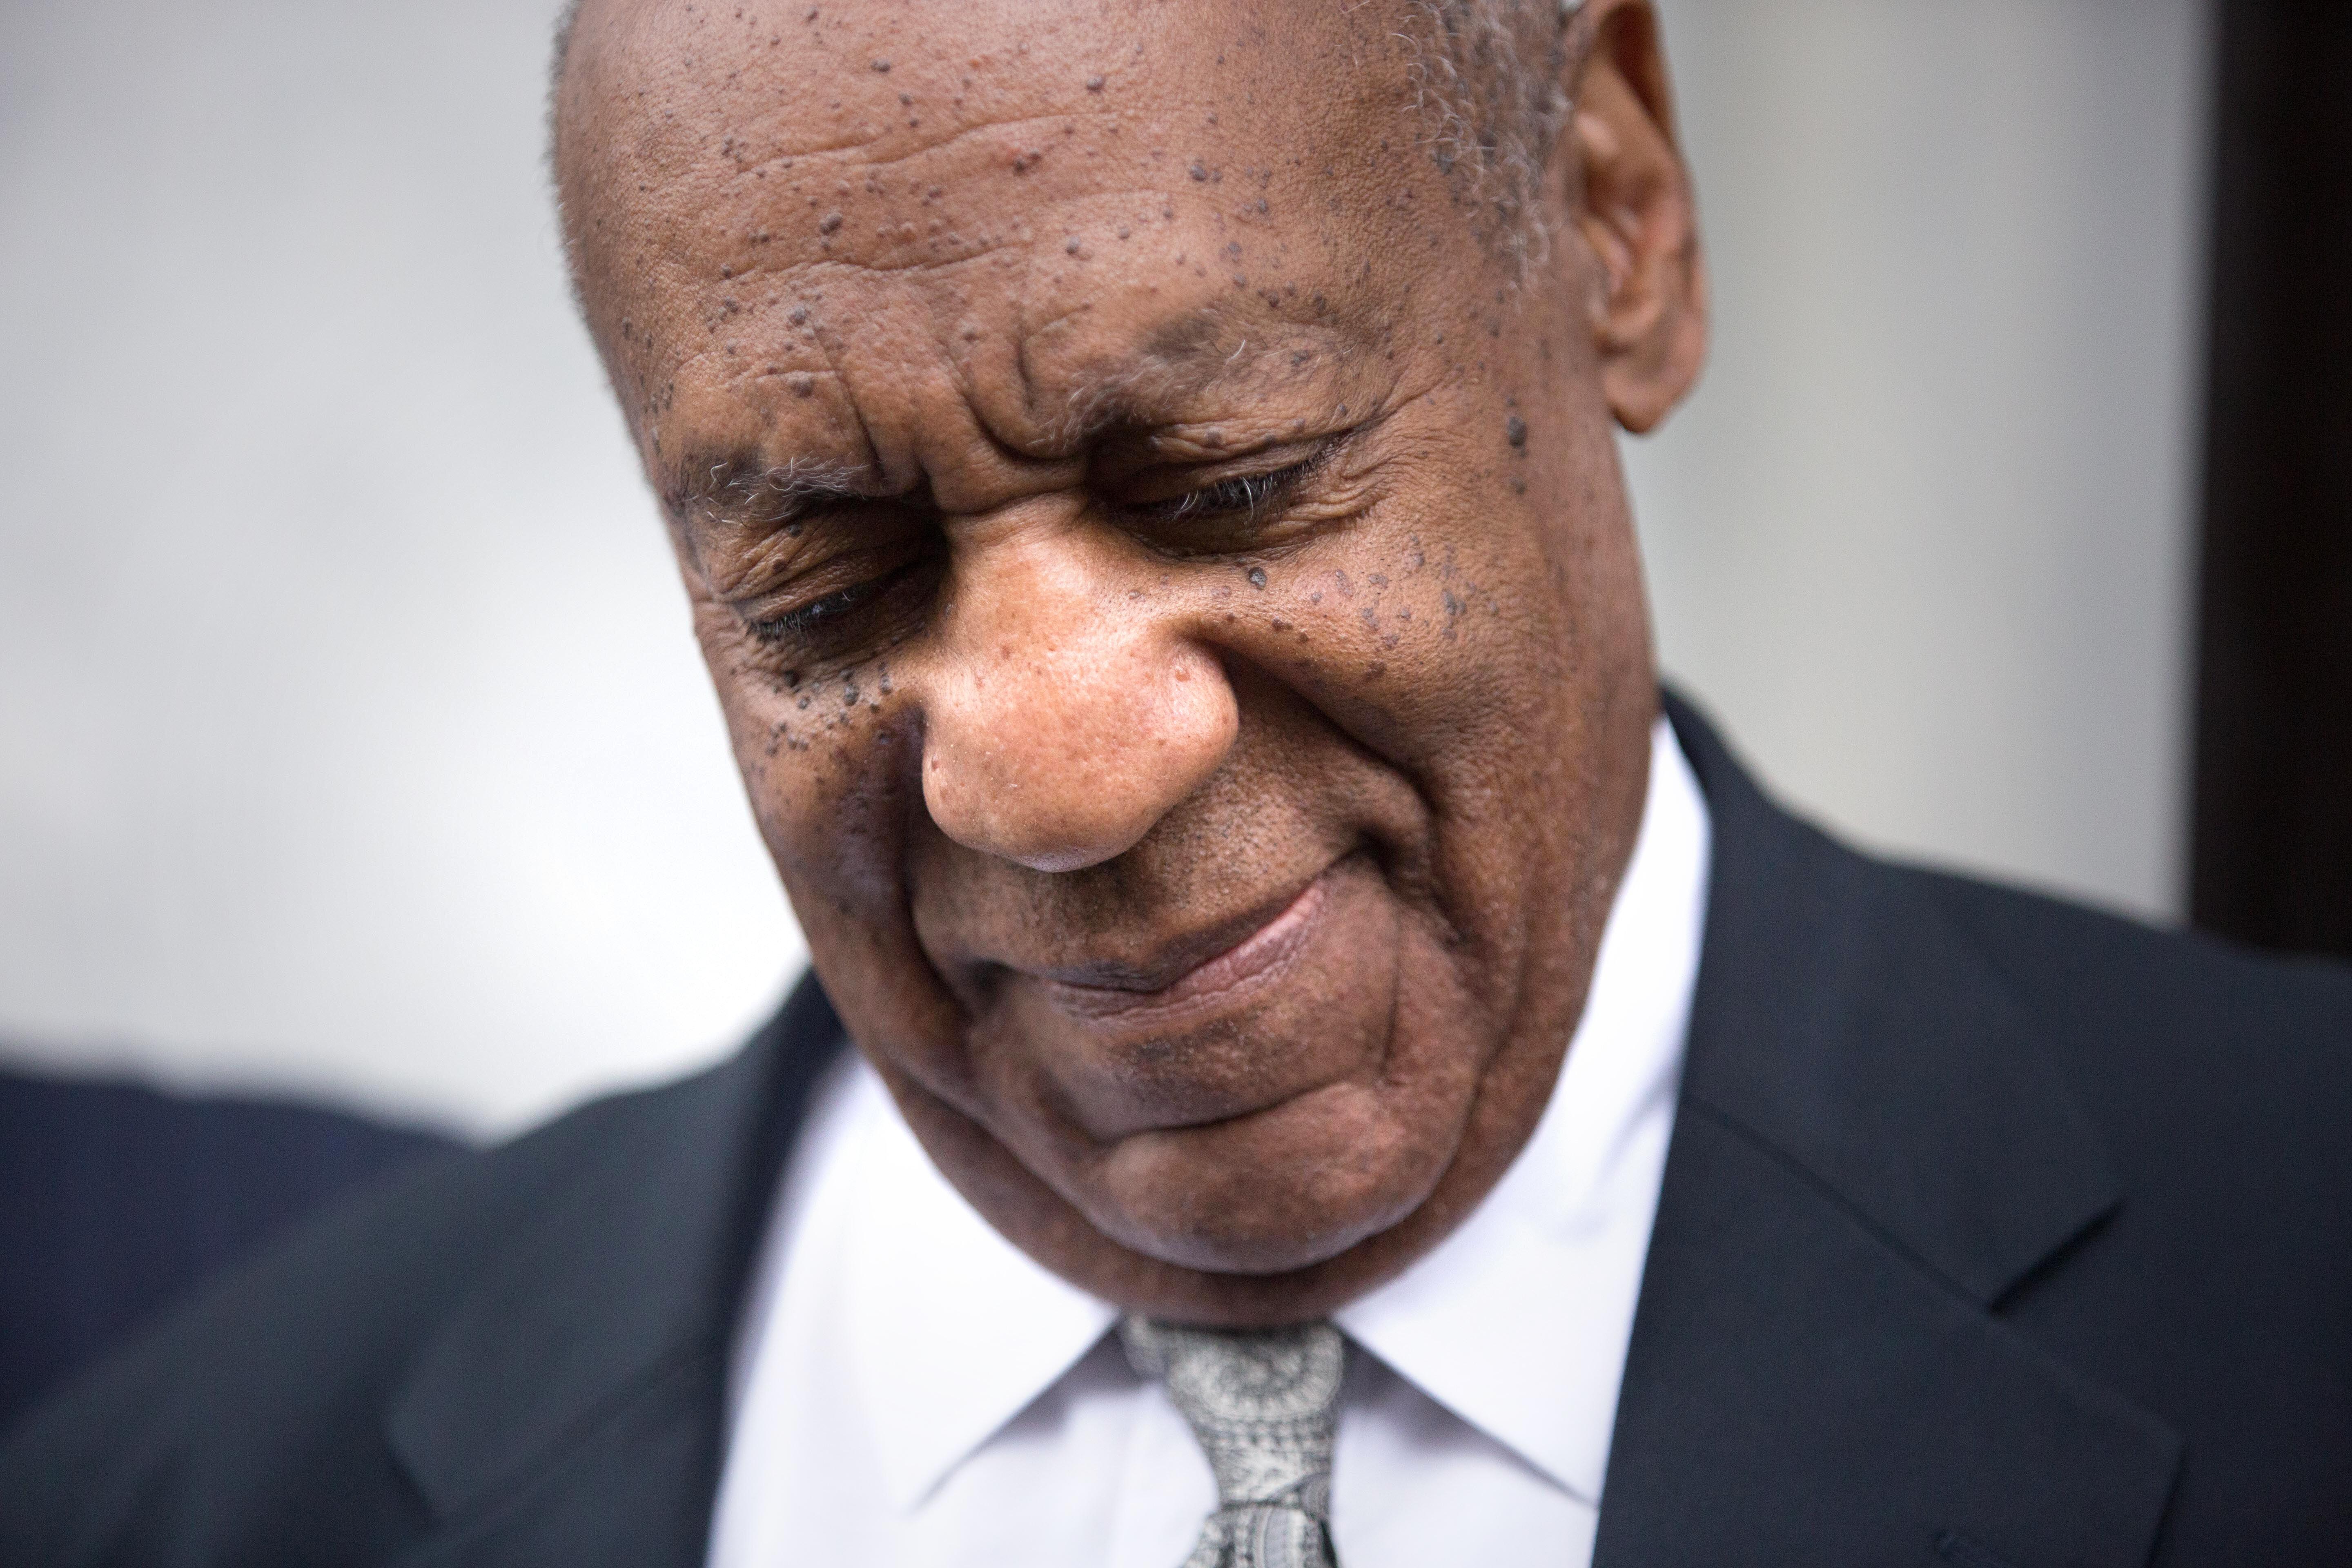 NORRISTOWN, PA - JUNE 17: Actor and comedian Bill Cosby leaves the Montgomery County Courthouse on June 17, 2017 in Norristown, Pennsylvania. After 52 hours of deliberation, a mistrial was announced in Cosby's sexual assault trial. (Photo by Kevin Hagen/G